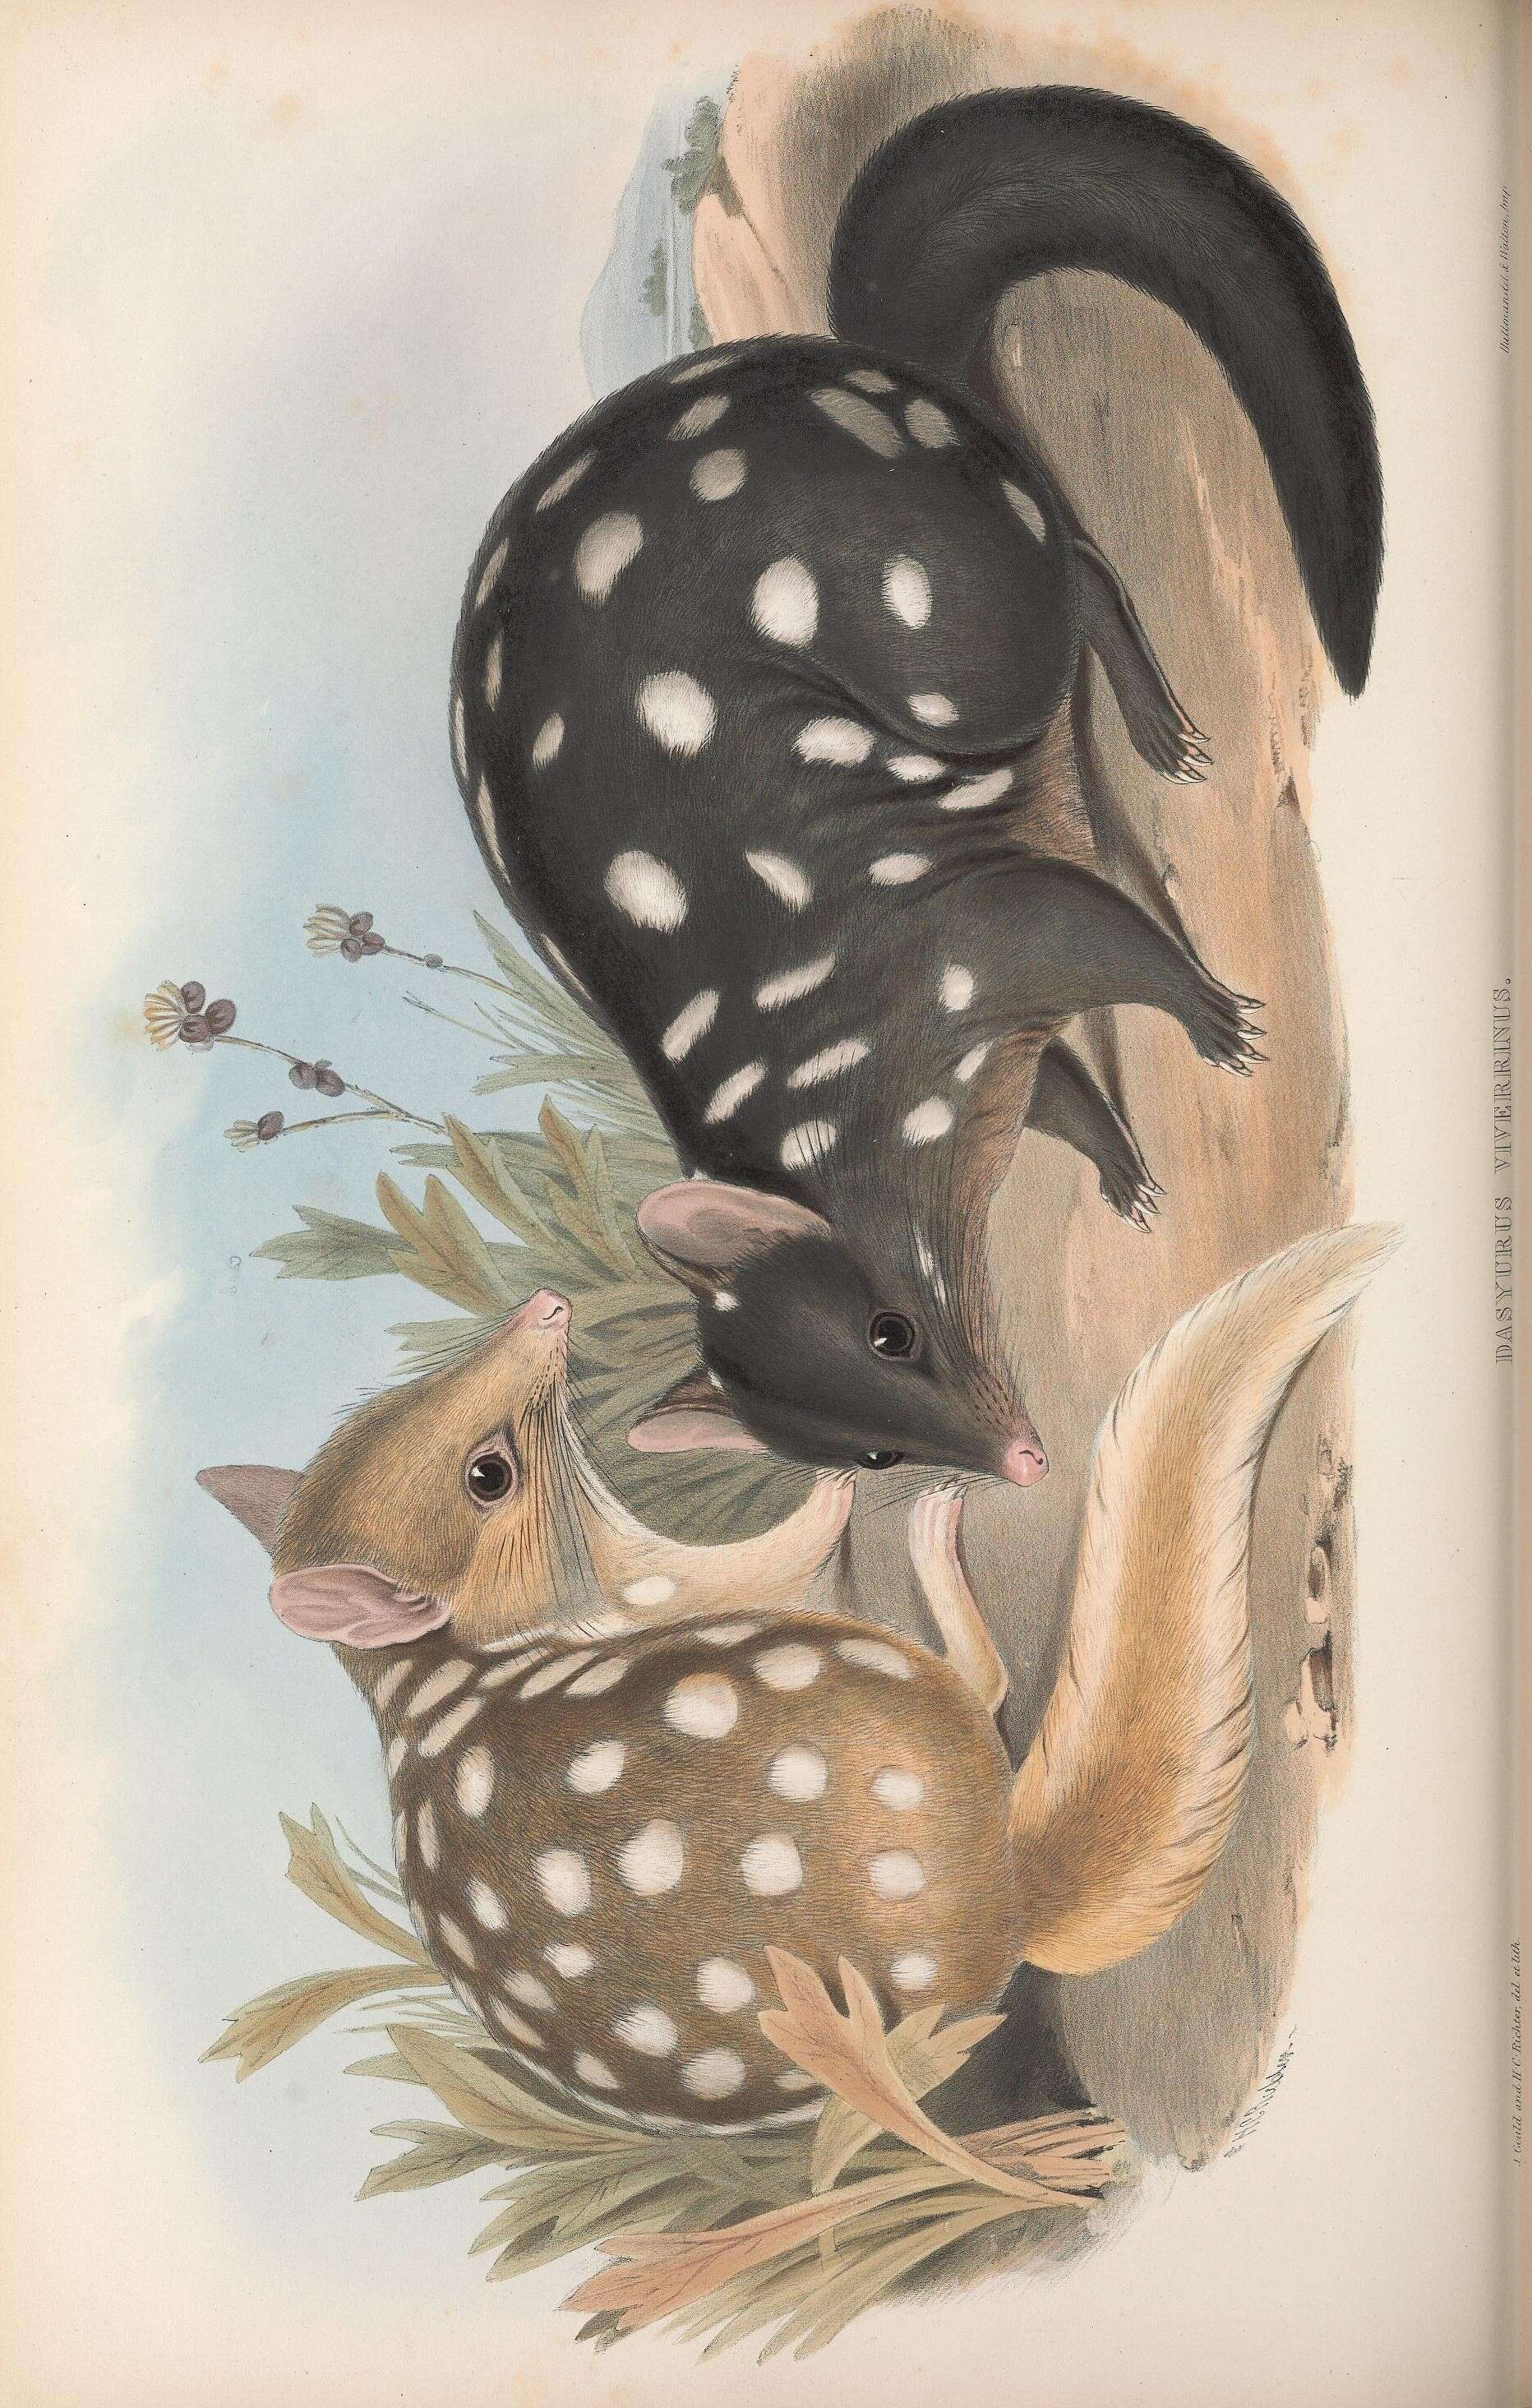 Image of Eastern Quoll